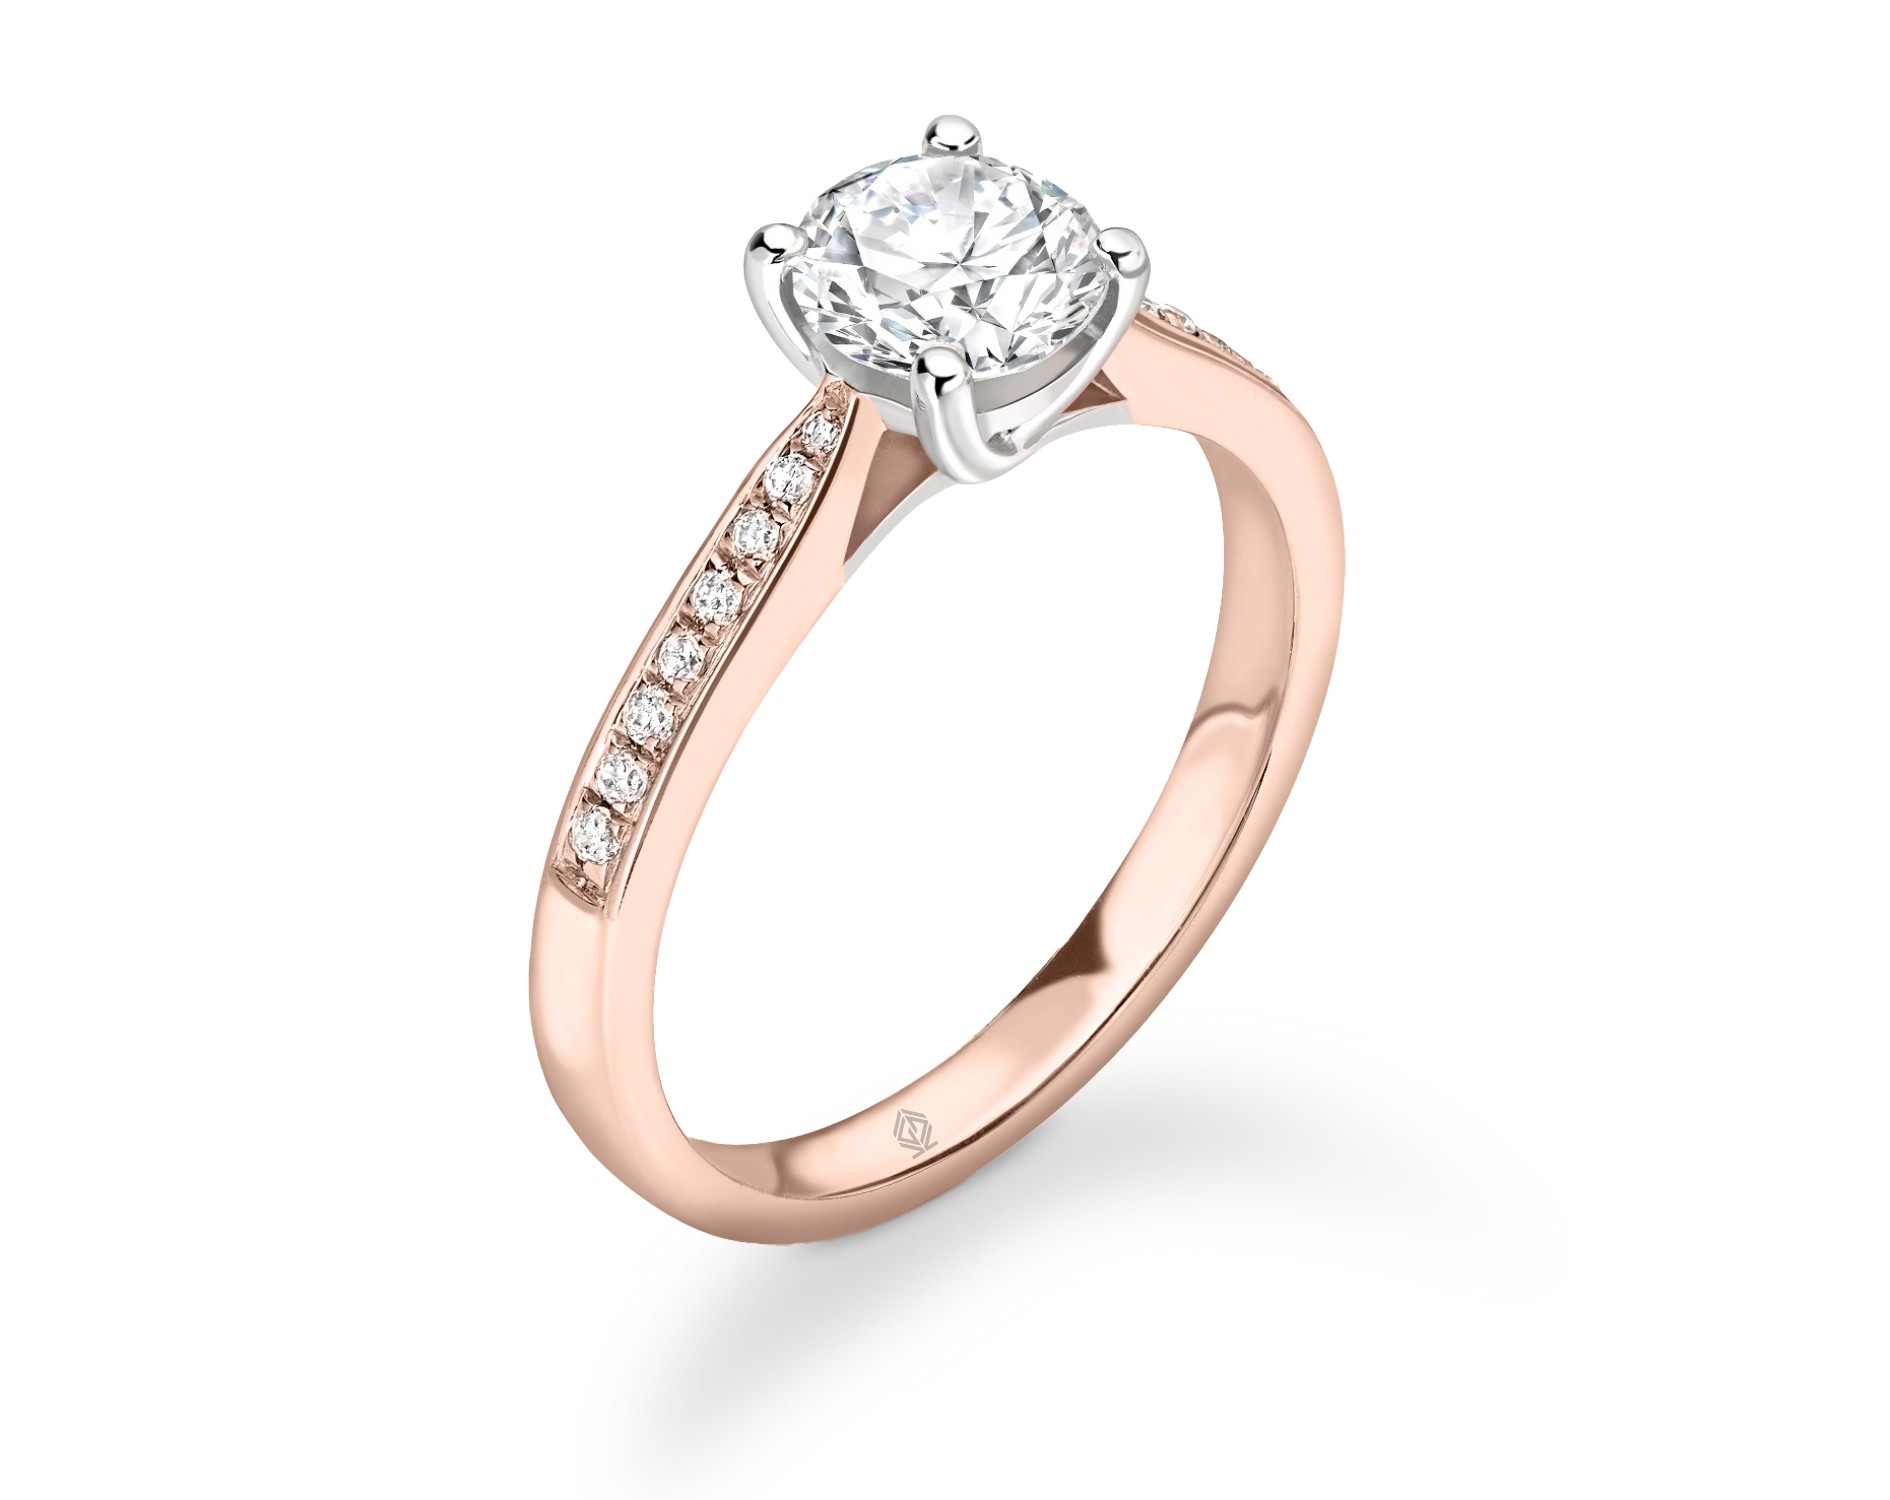 DUAL-TONE ROUND CUT DIAMOND RING WITH SIDE STONES CHANNEL SET